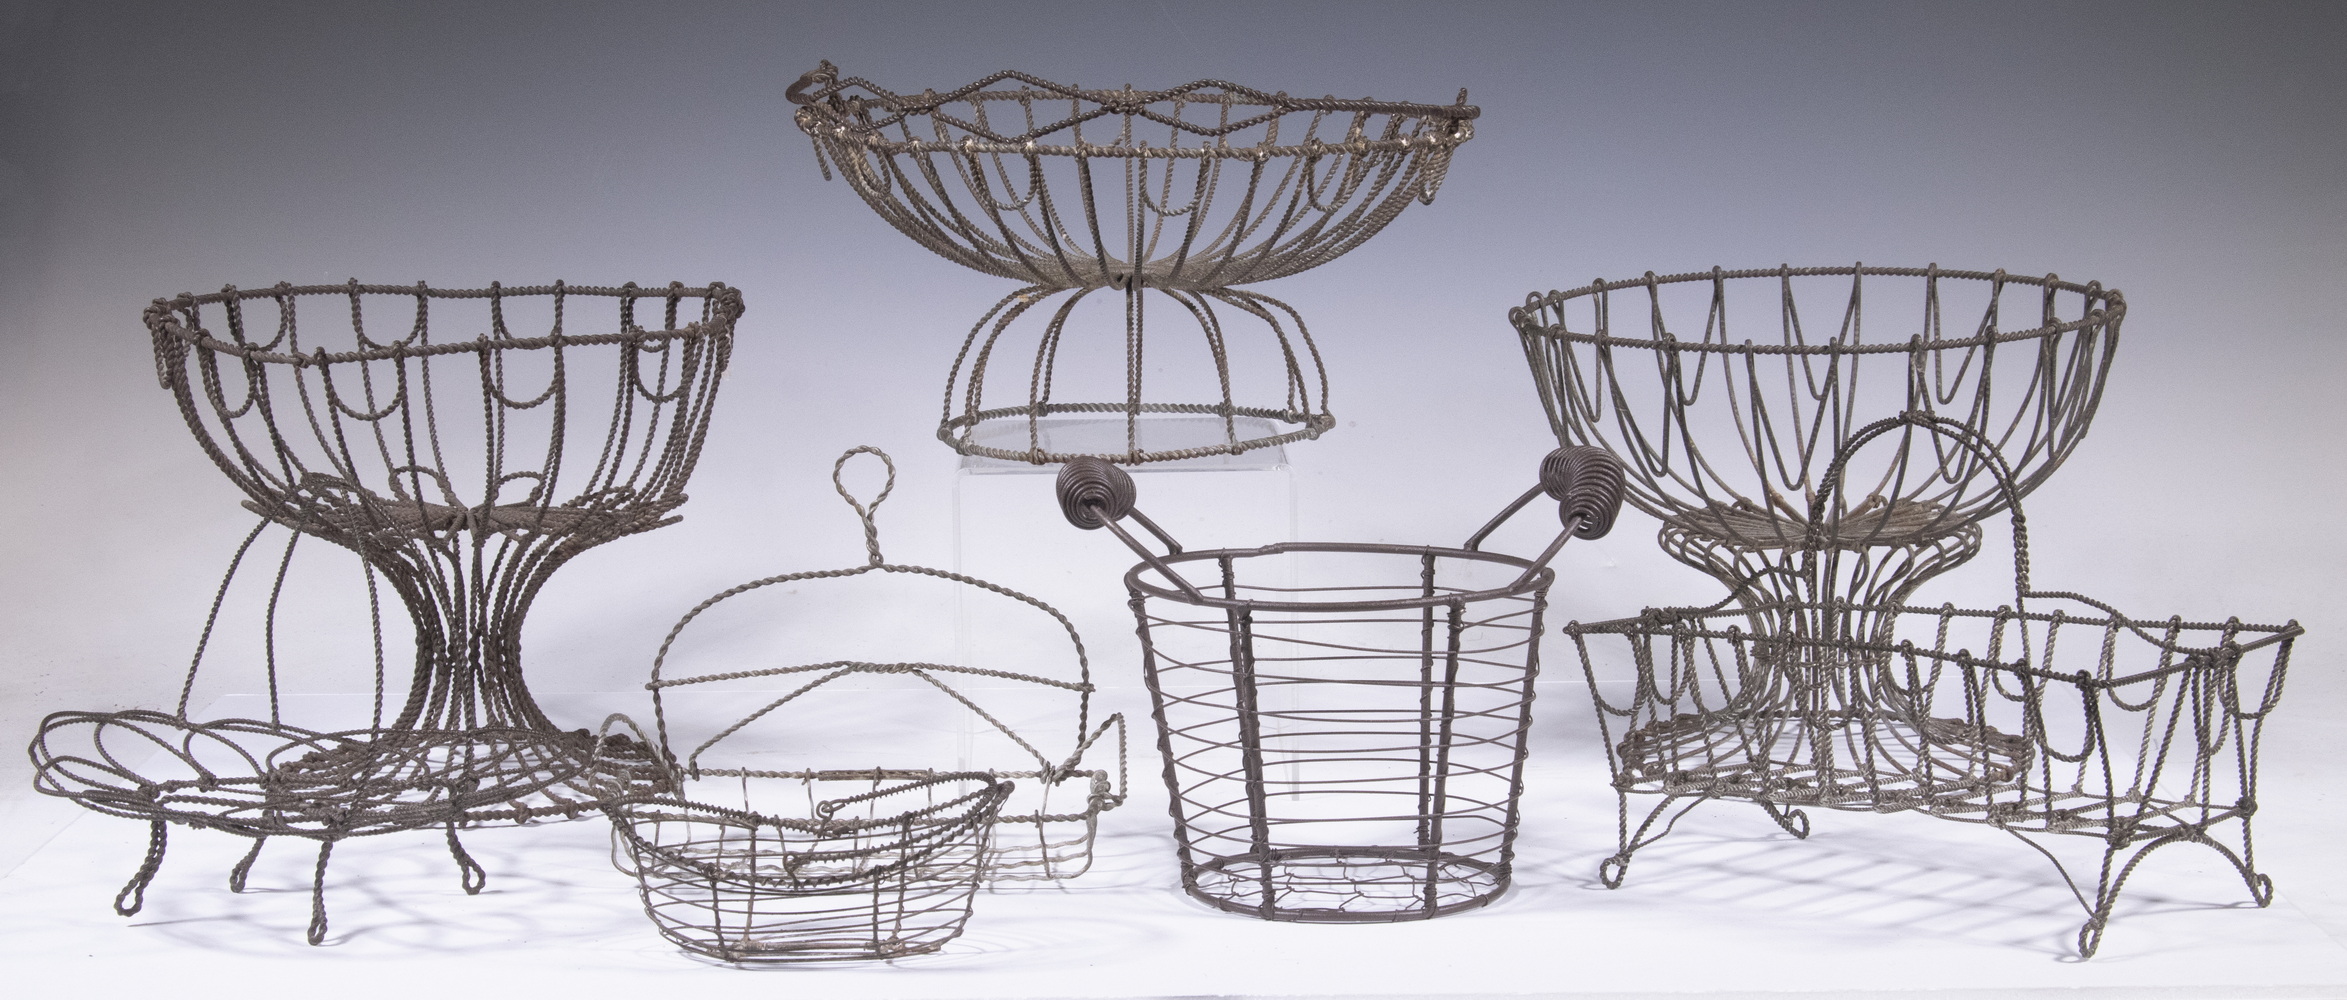 WIRE BASKET COLLECTION Group of